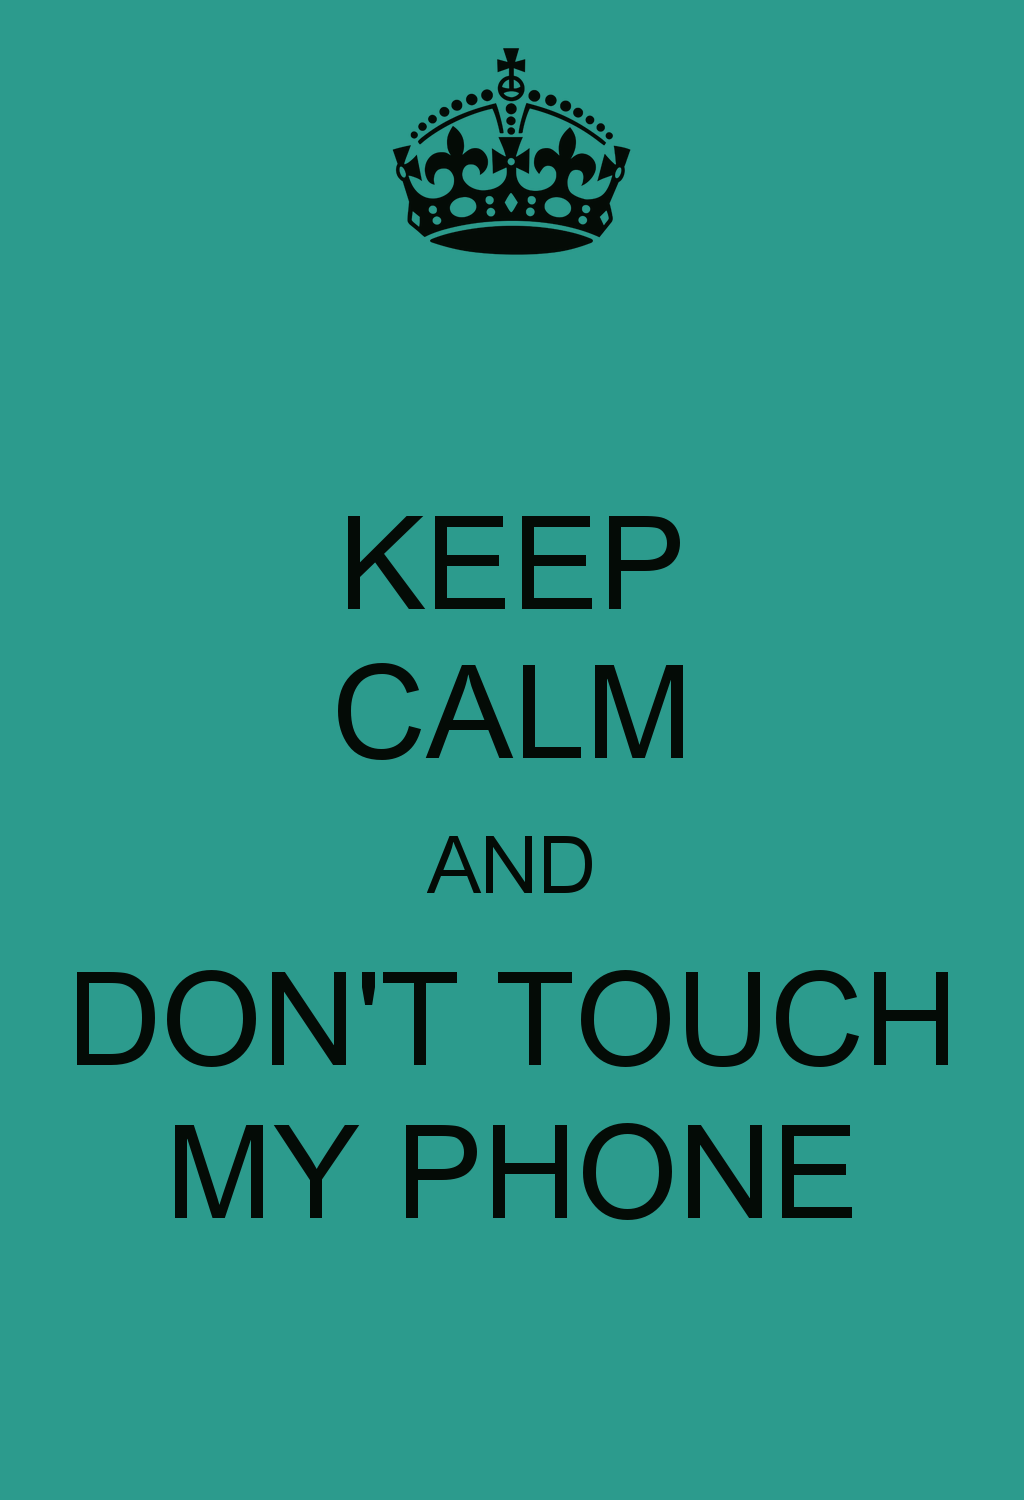 Dont Touch My Computer Wallpaper Hd Keep calm and don t touch my